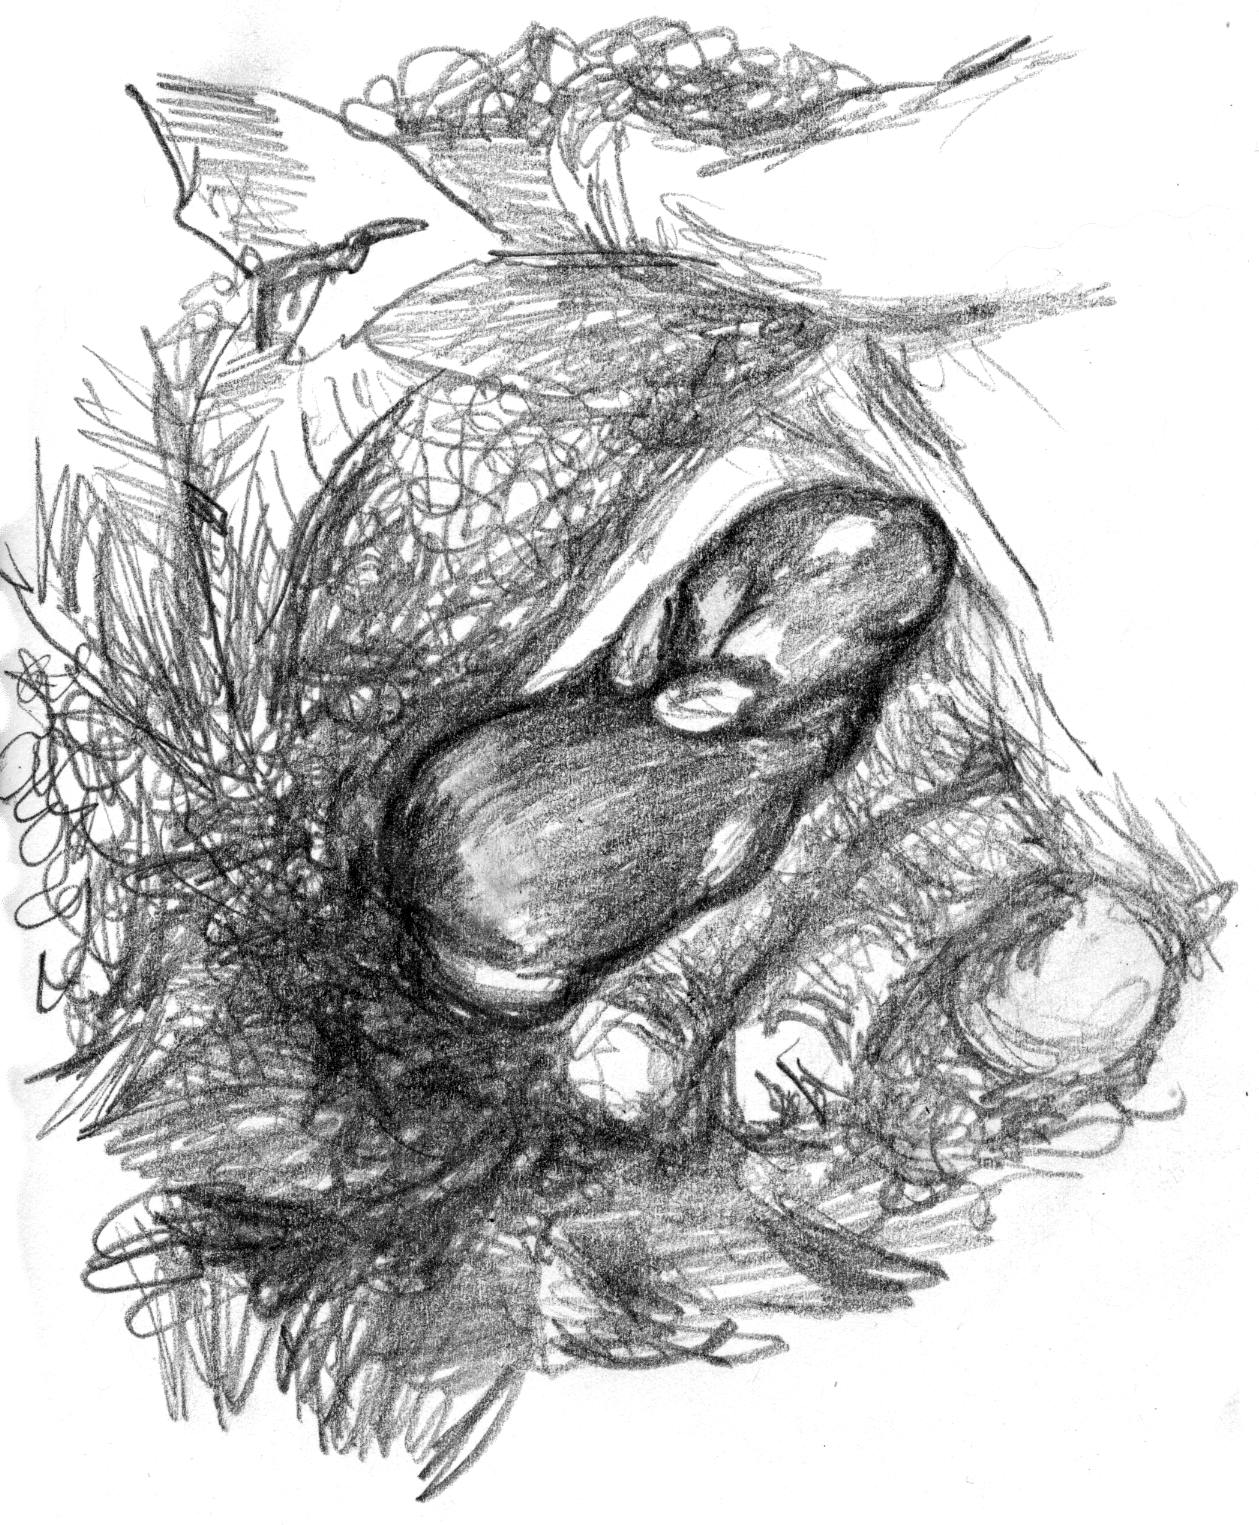 drawing of a baby cottontail, in a gloved hand, going into its nest.